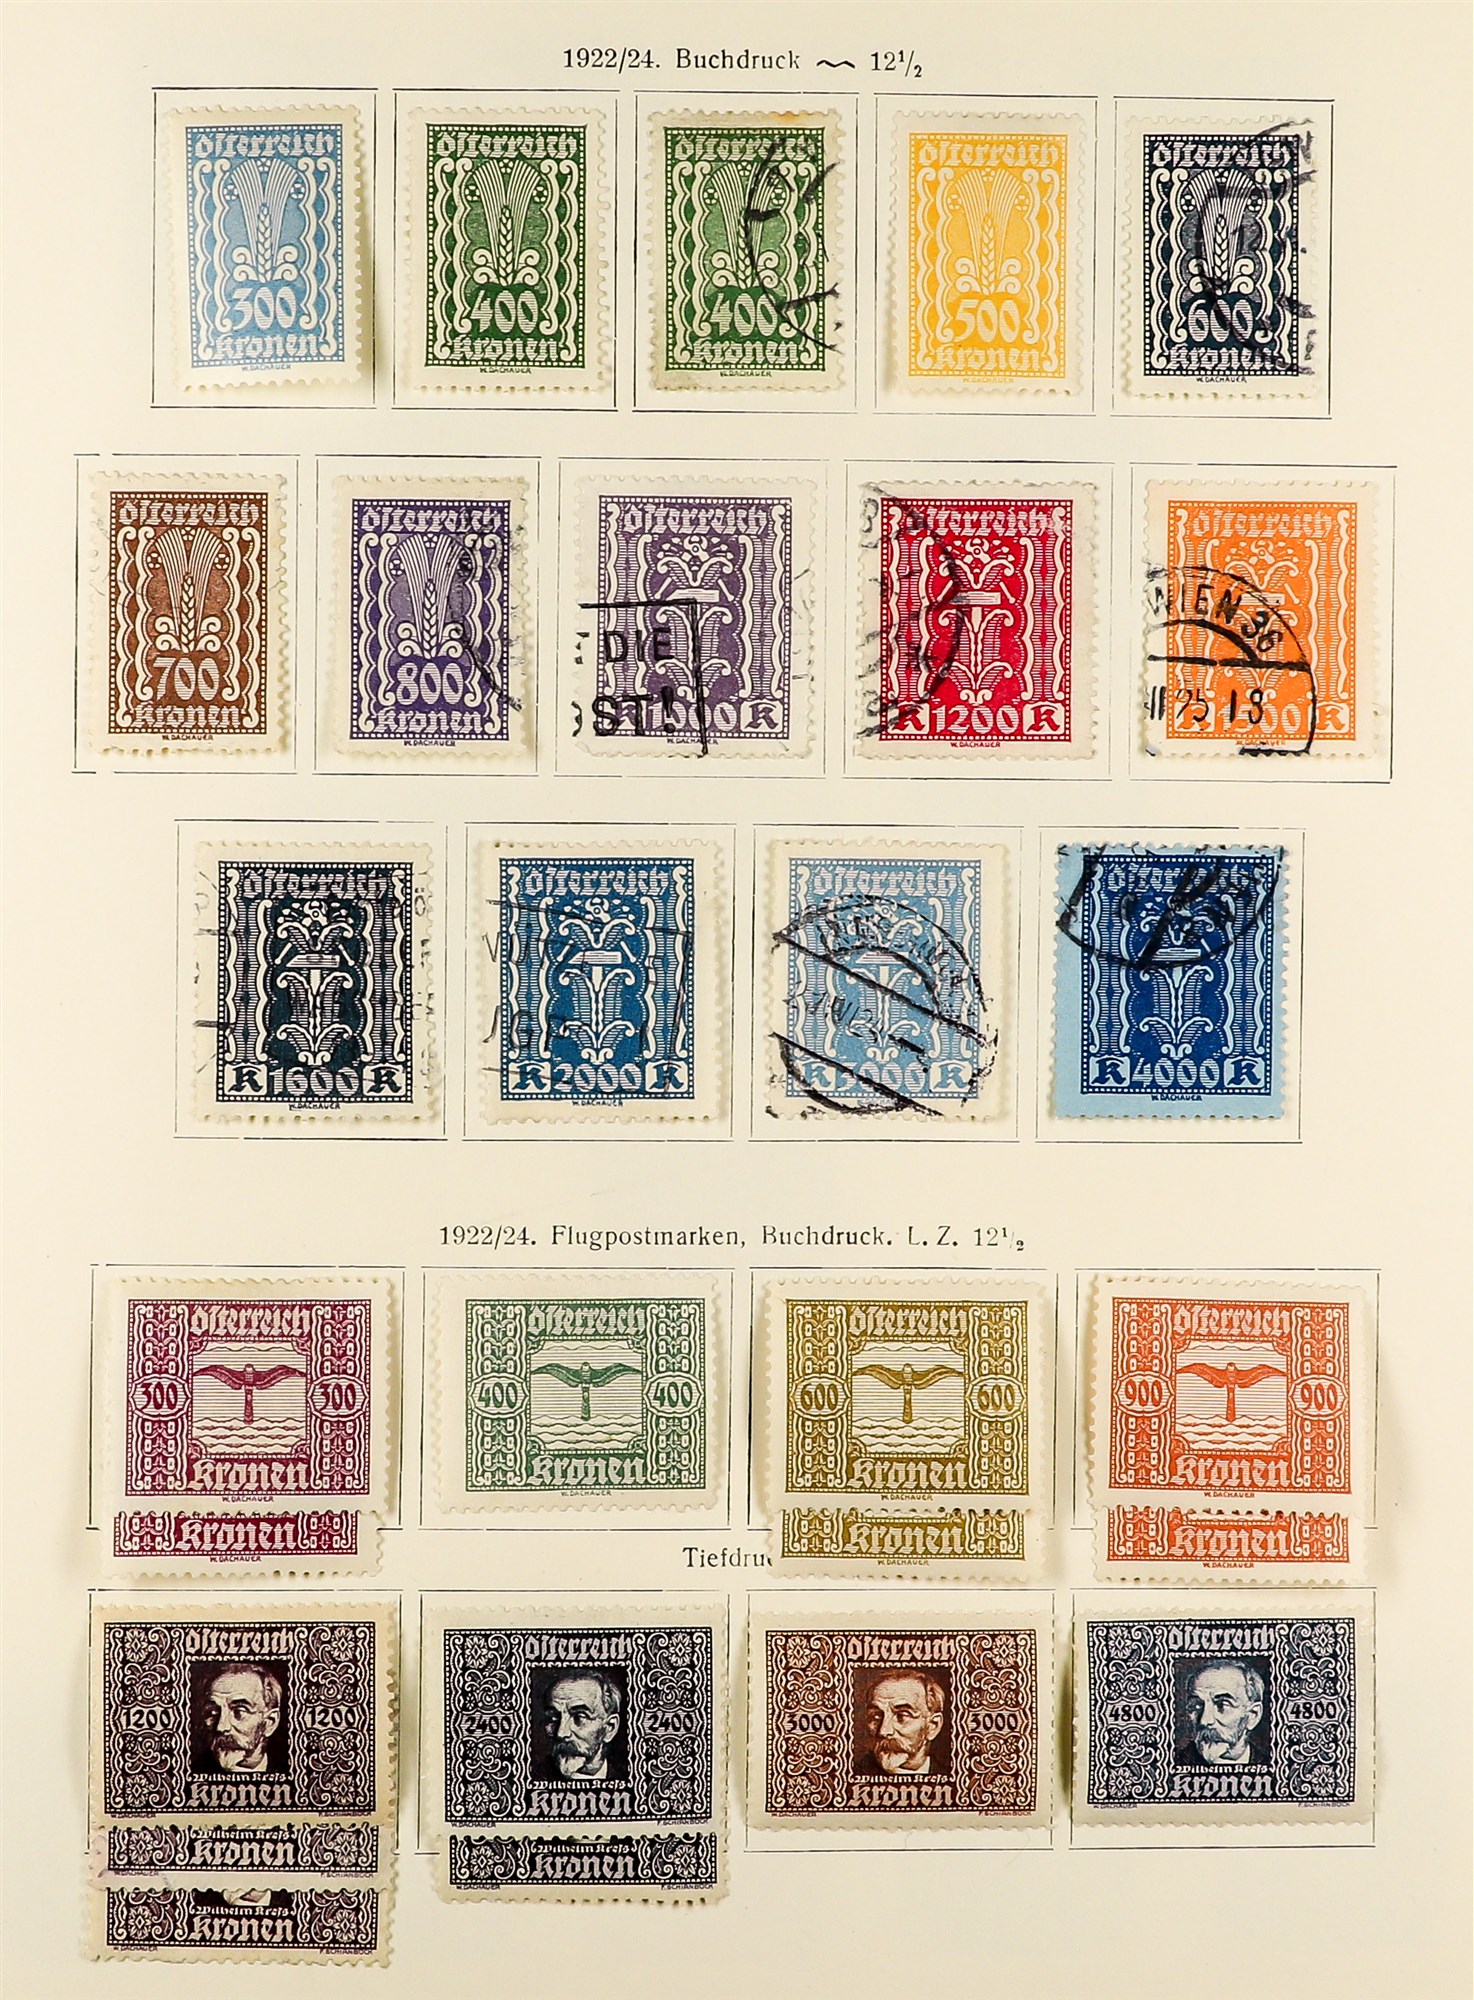 AUSTRIA 1918 - 1937 REPUBLIC COLLECTION of chiefly mint / never hinged mint sets in album incl - Image 7 of 22